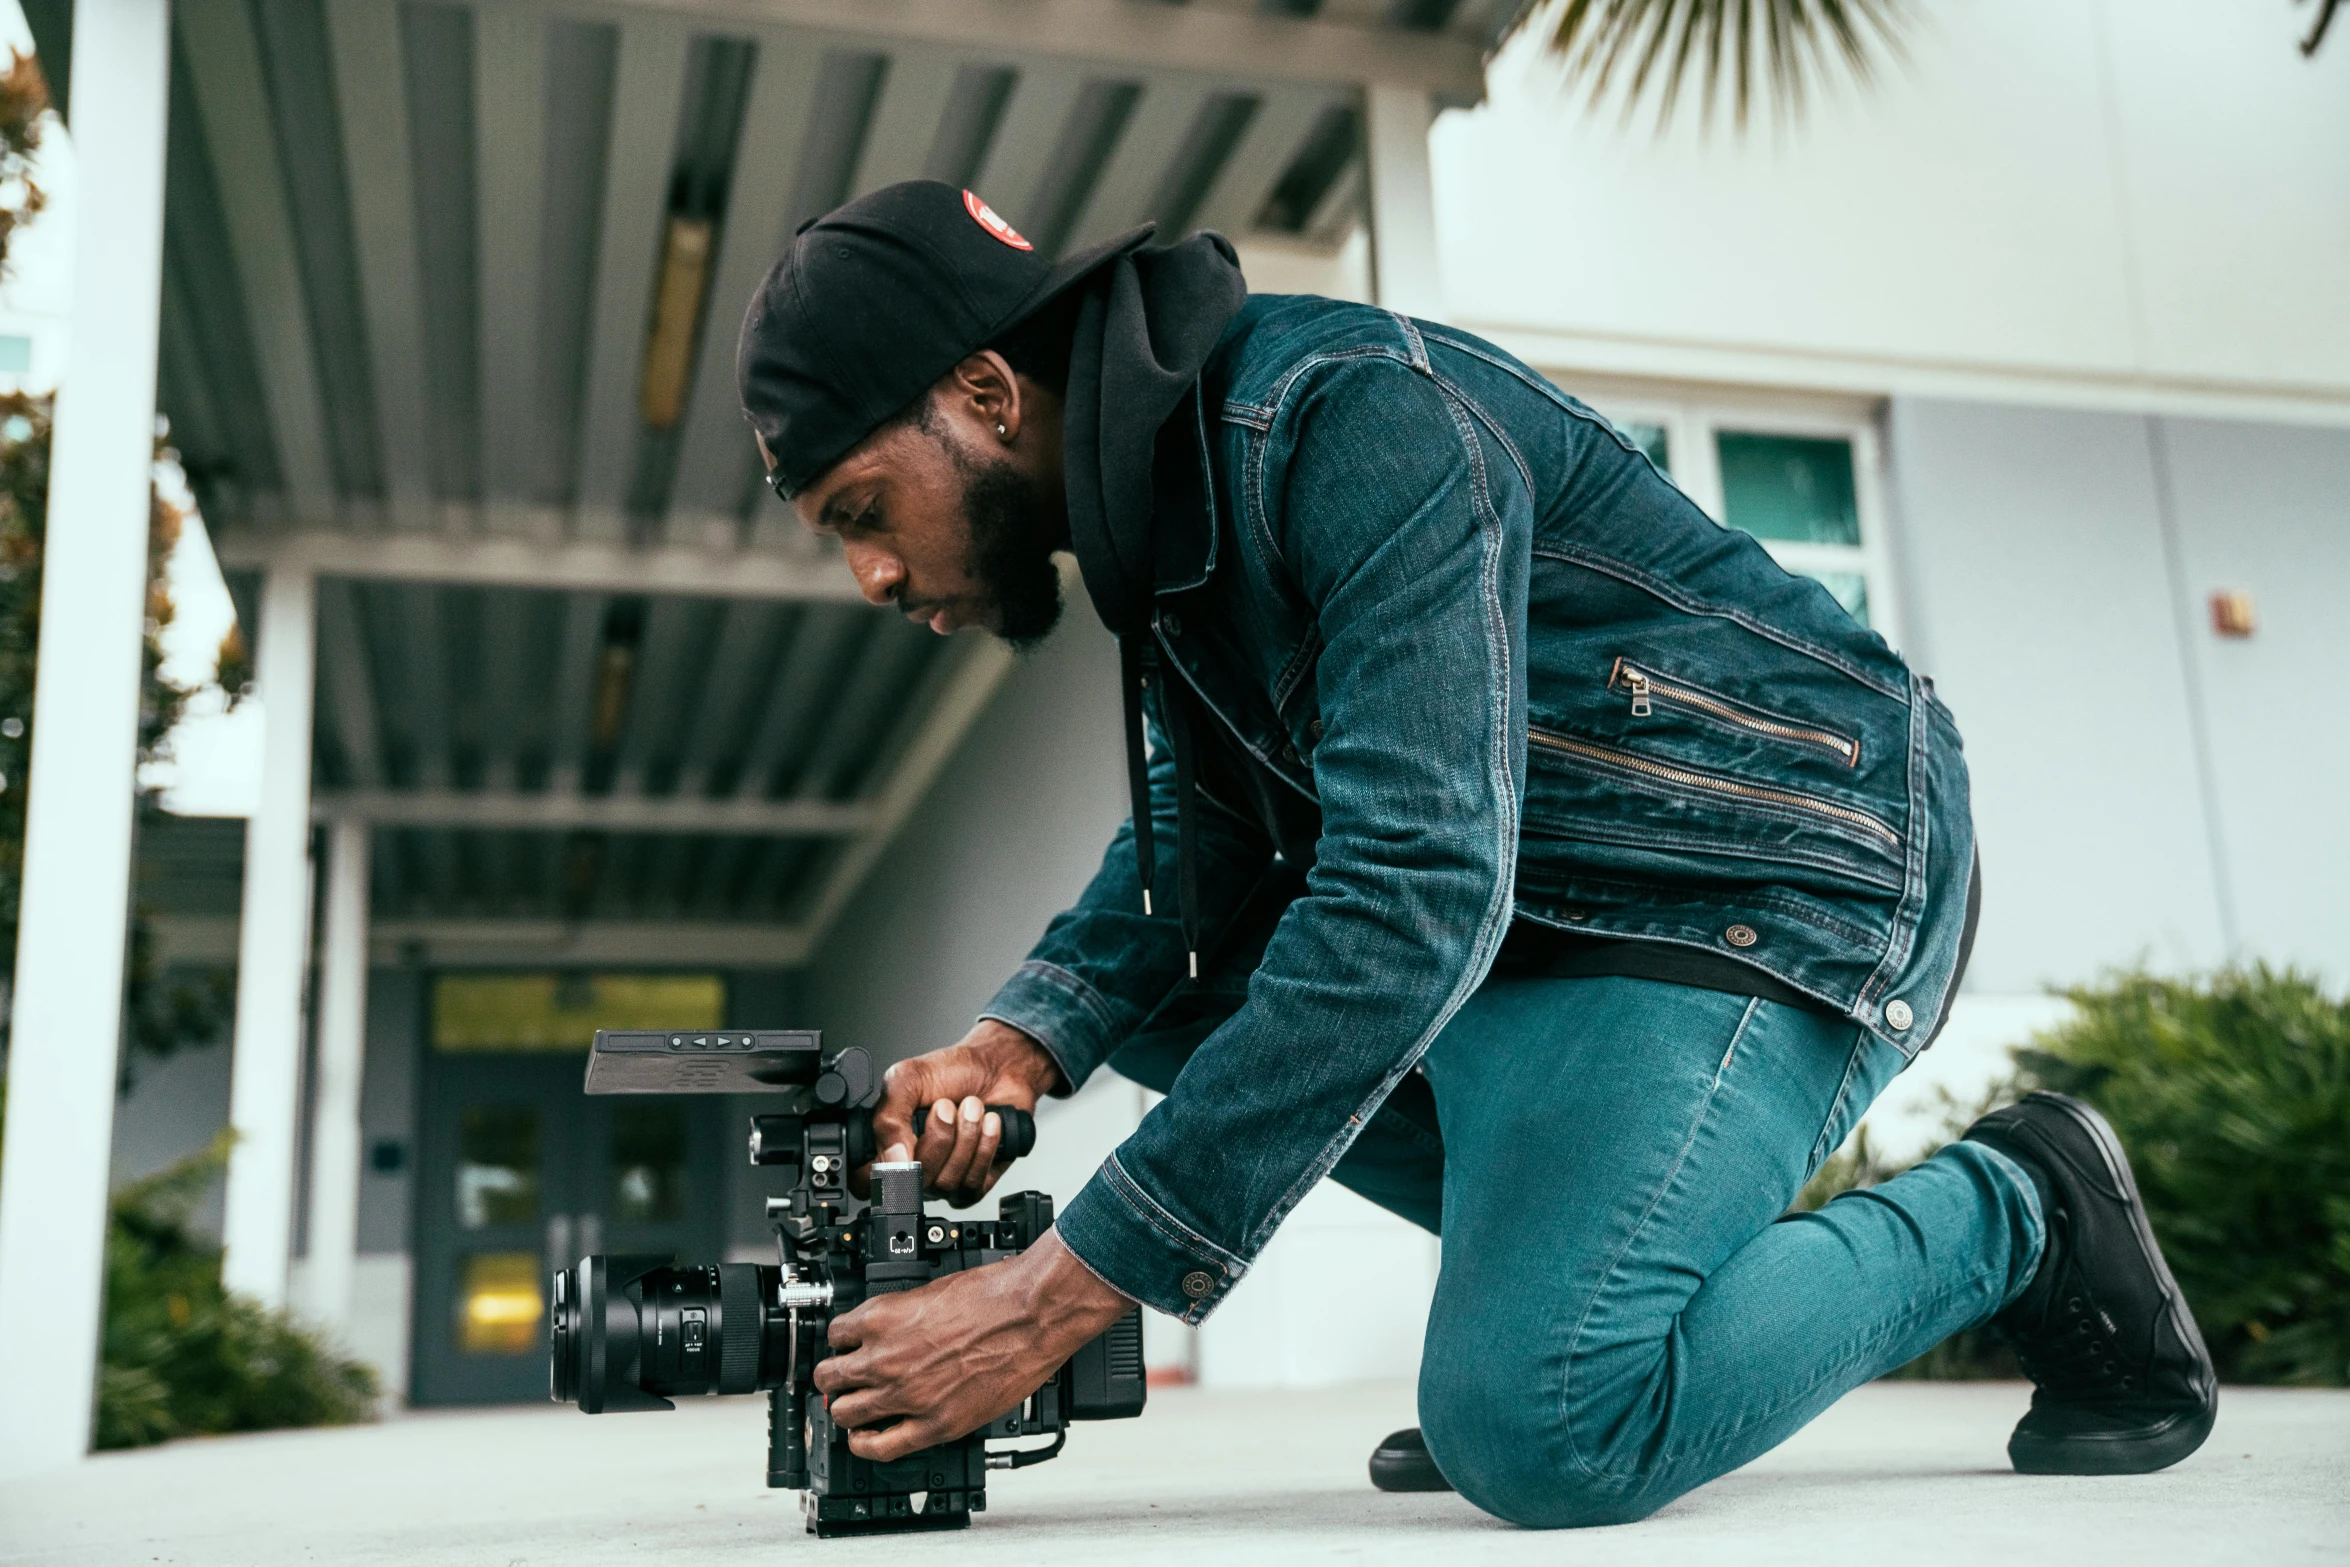 a man kneeling down holding a camera and looking at it